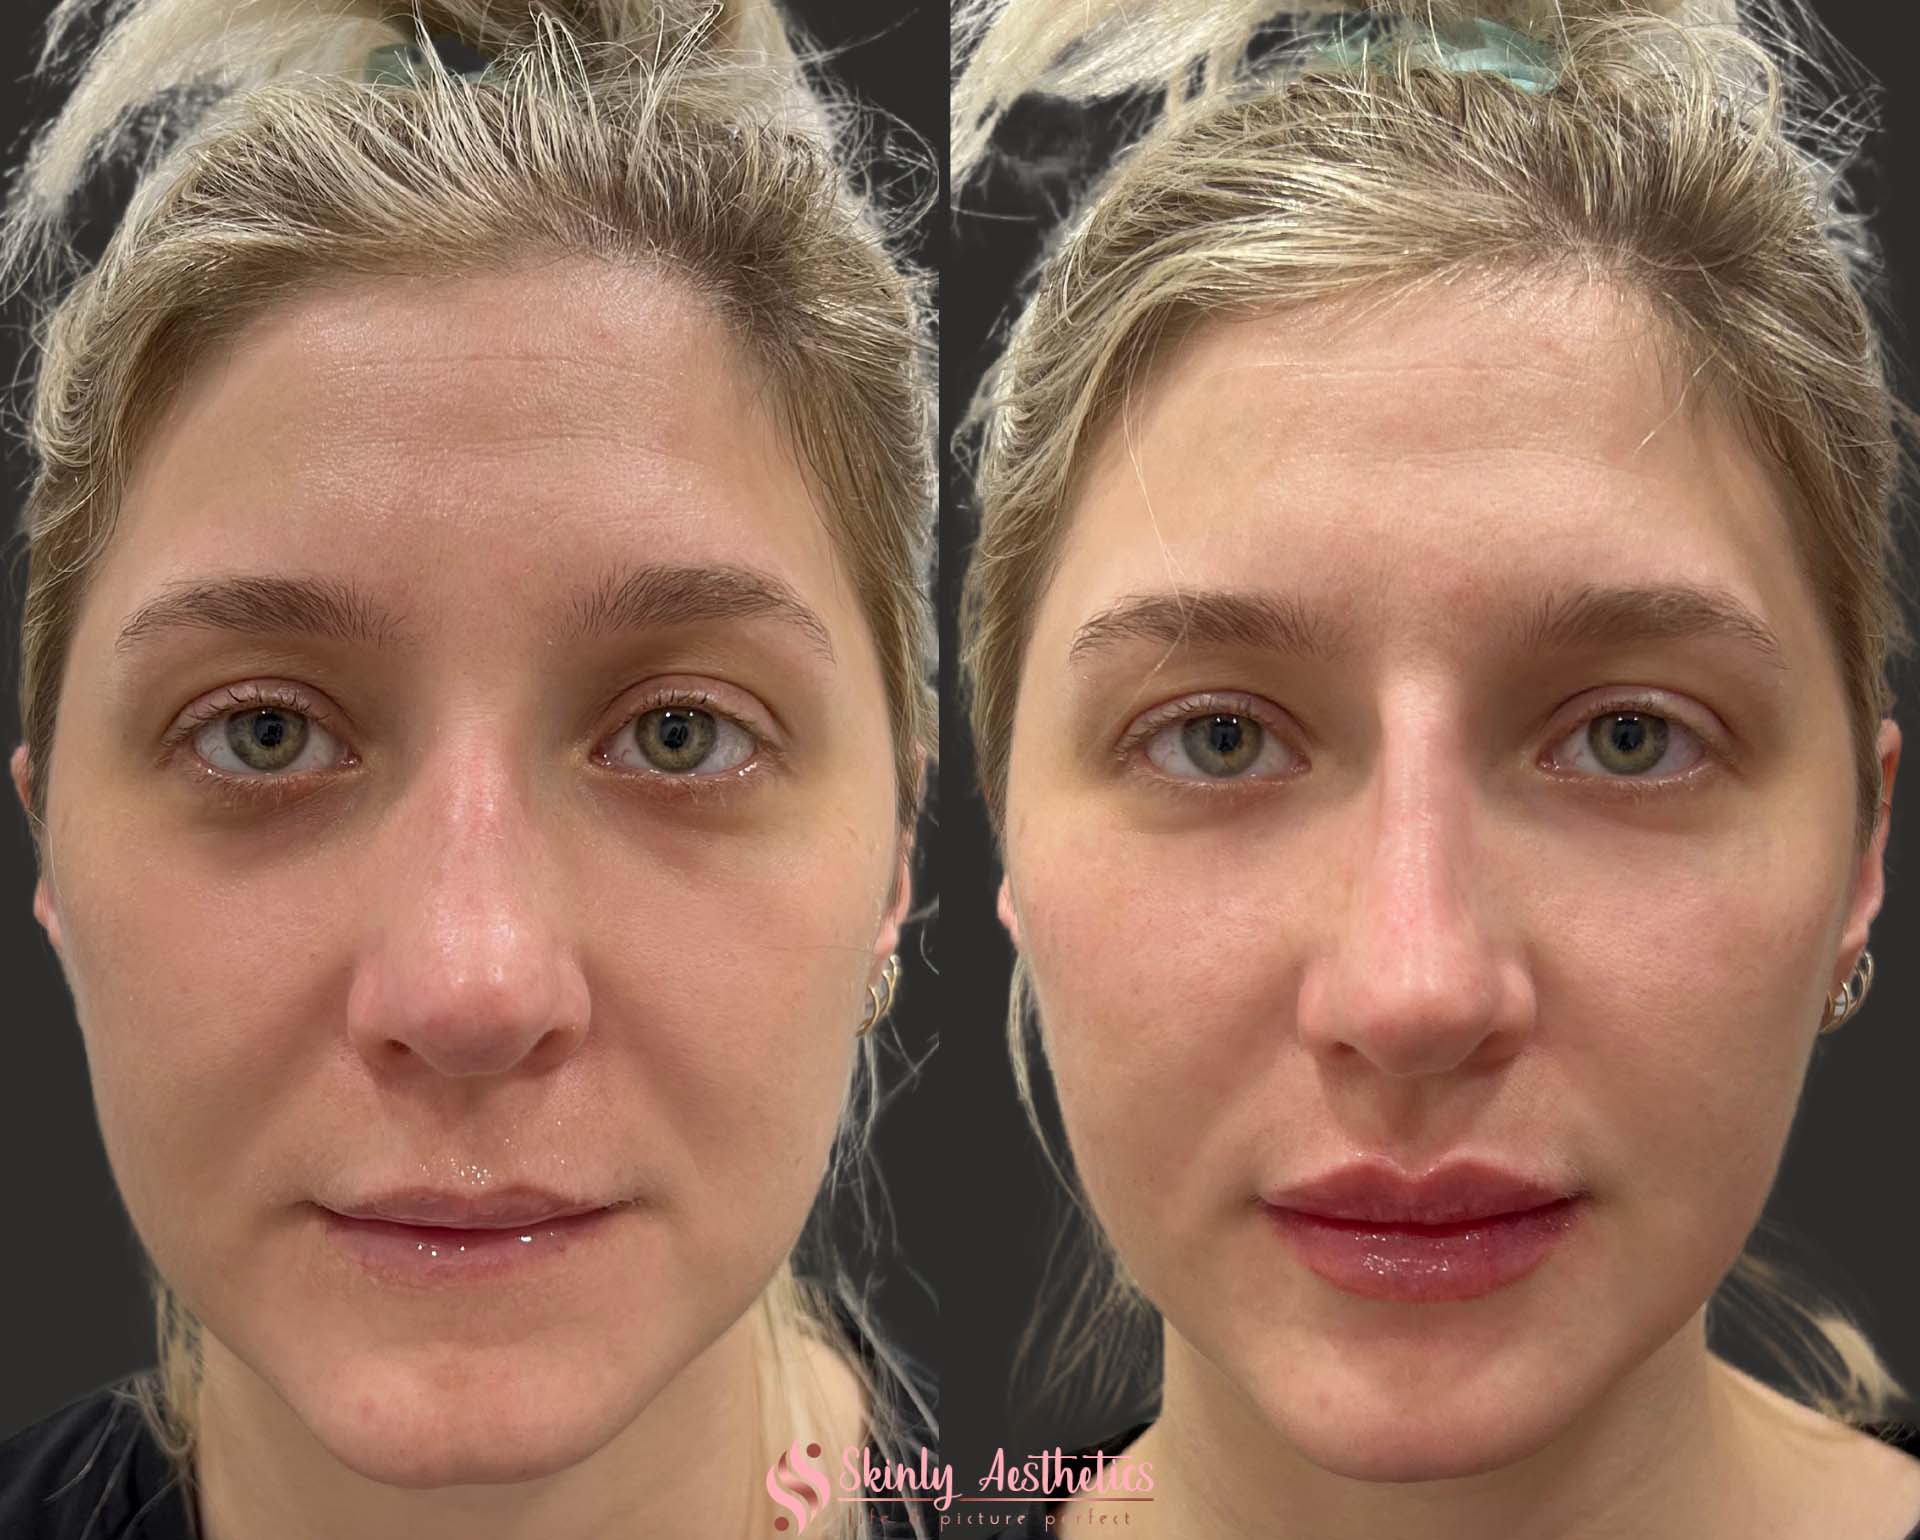 Cheek Fillers - Before & After Results at Skinly